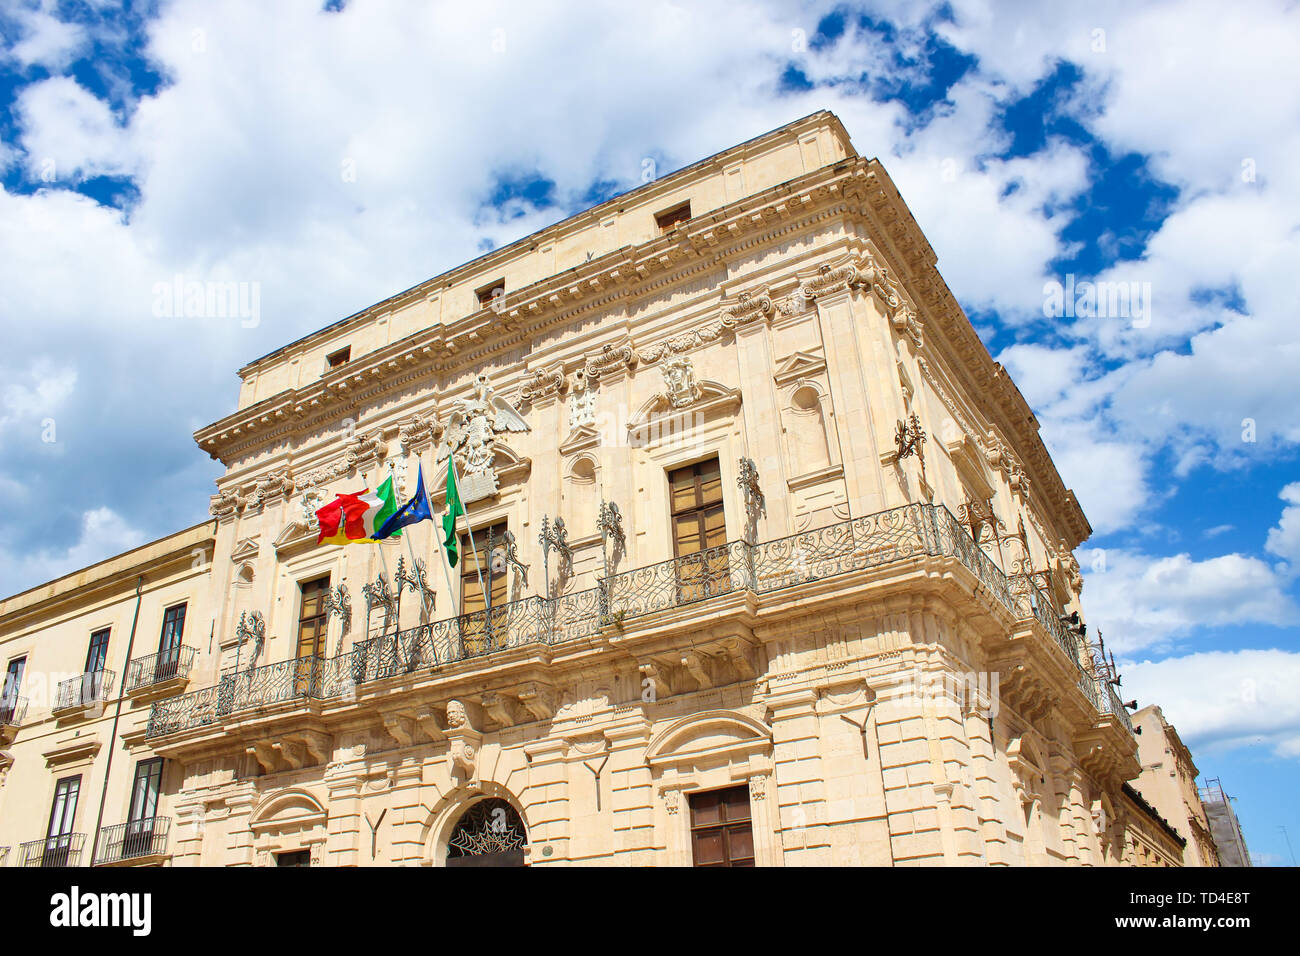 Detail of beautiful Vermexio Palace in Syracuse, Sicily, Italy. The historical building serves nowadays as a town hall. Located on famous Ortygia Island close to Syracuse Cathedral. Popular site. Stock Photo